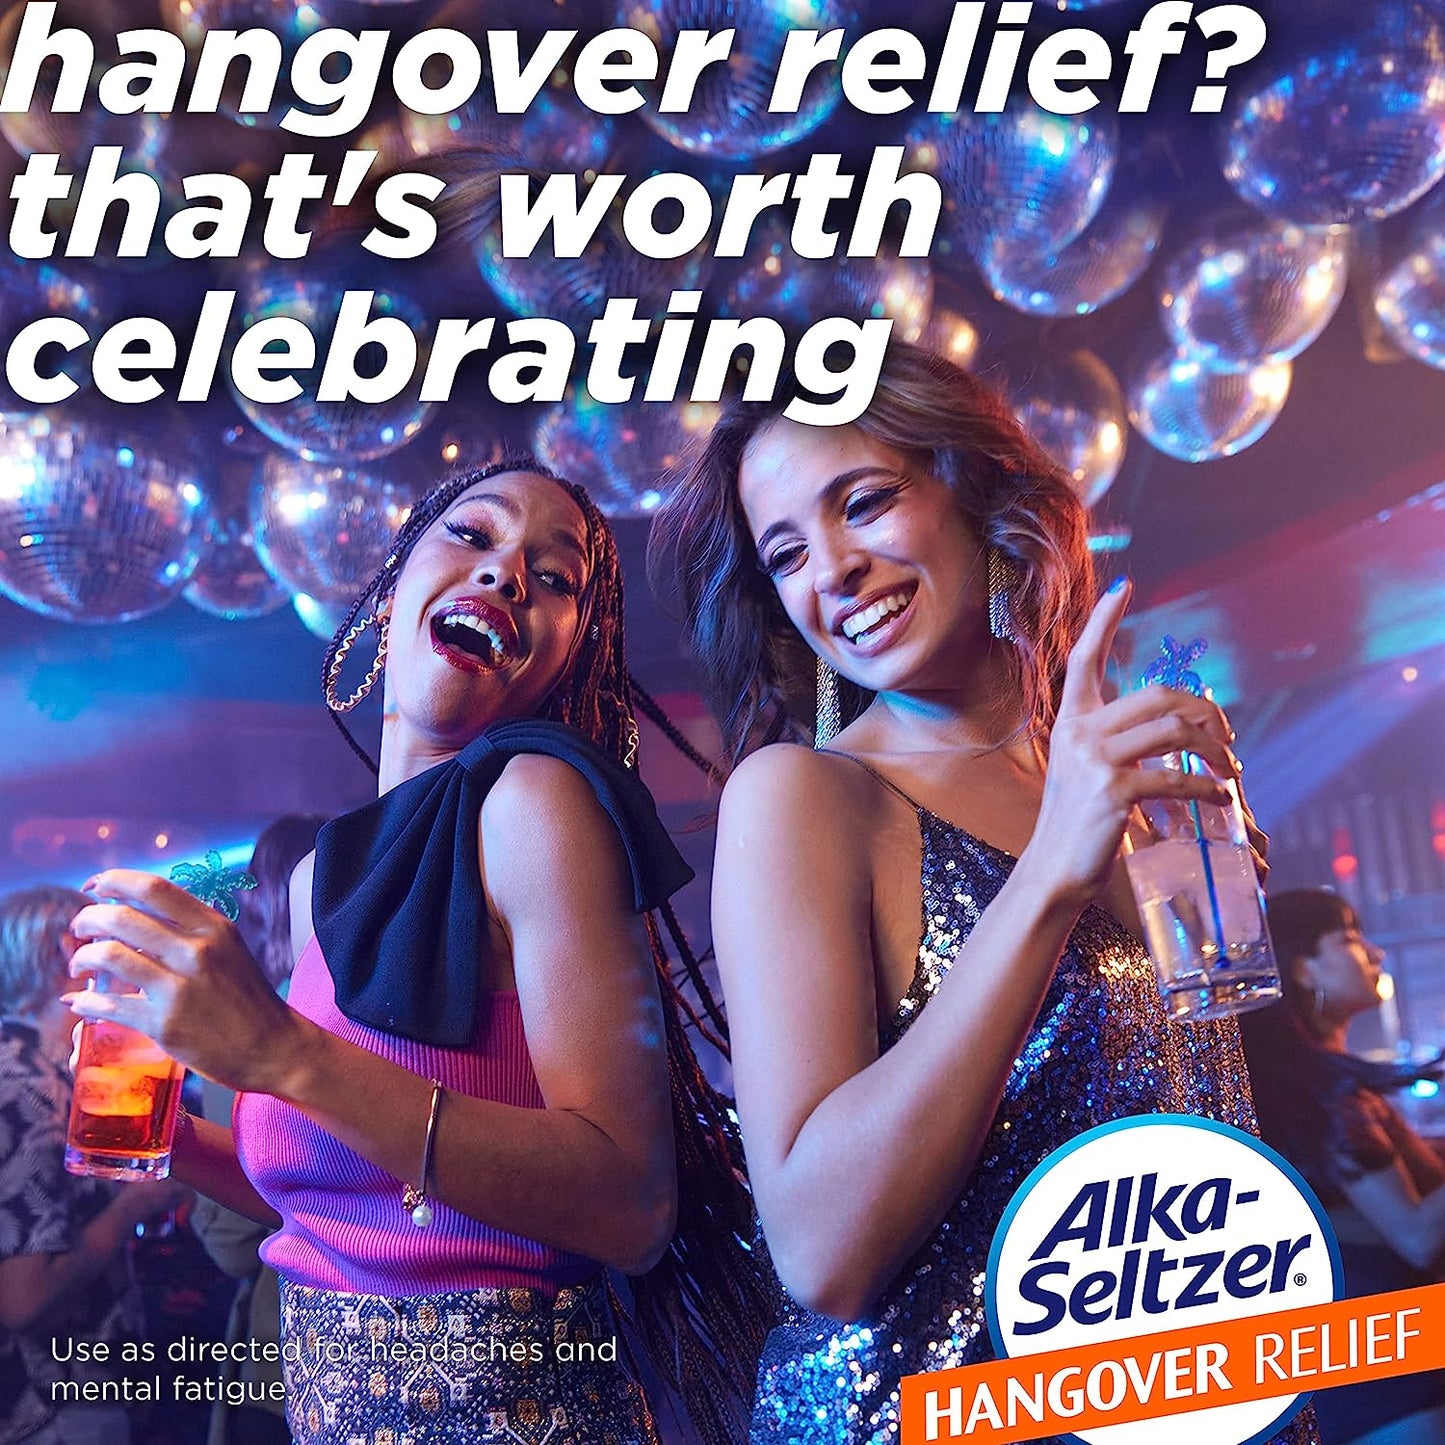 Alka-Seltzer Hangover Relief Tablets (3 Boxes, 20 Tablets Each)